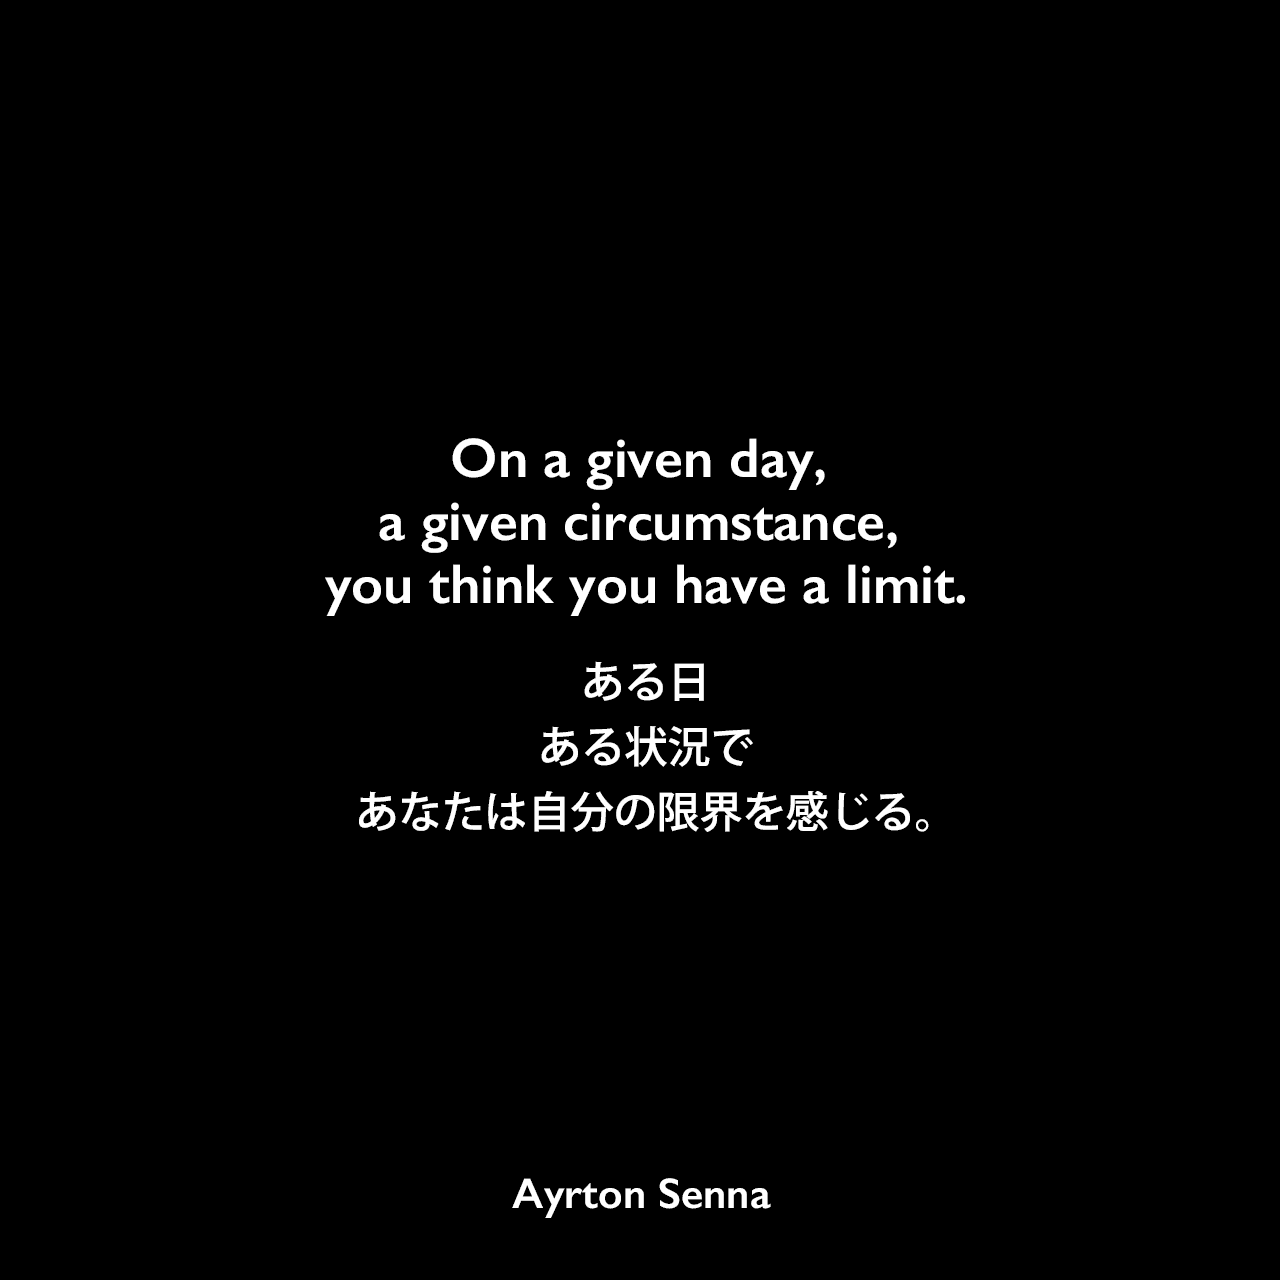 On a given day, a given circumstance, you think you have a limit.ある日、ある状況で、あなたは自分の限界を感じる。Ayrton Senna